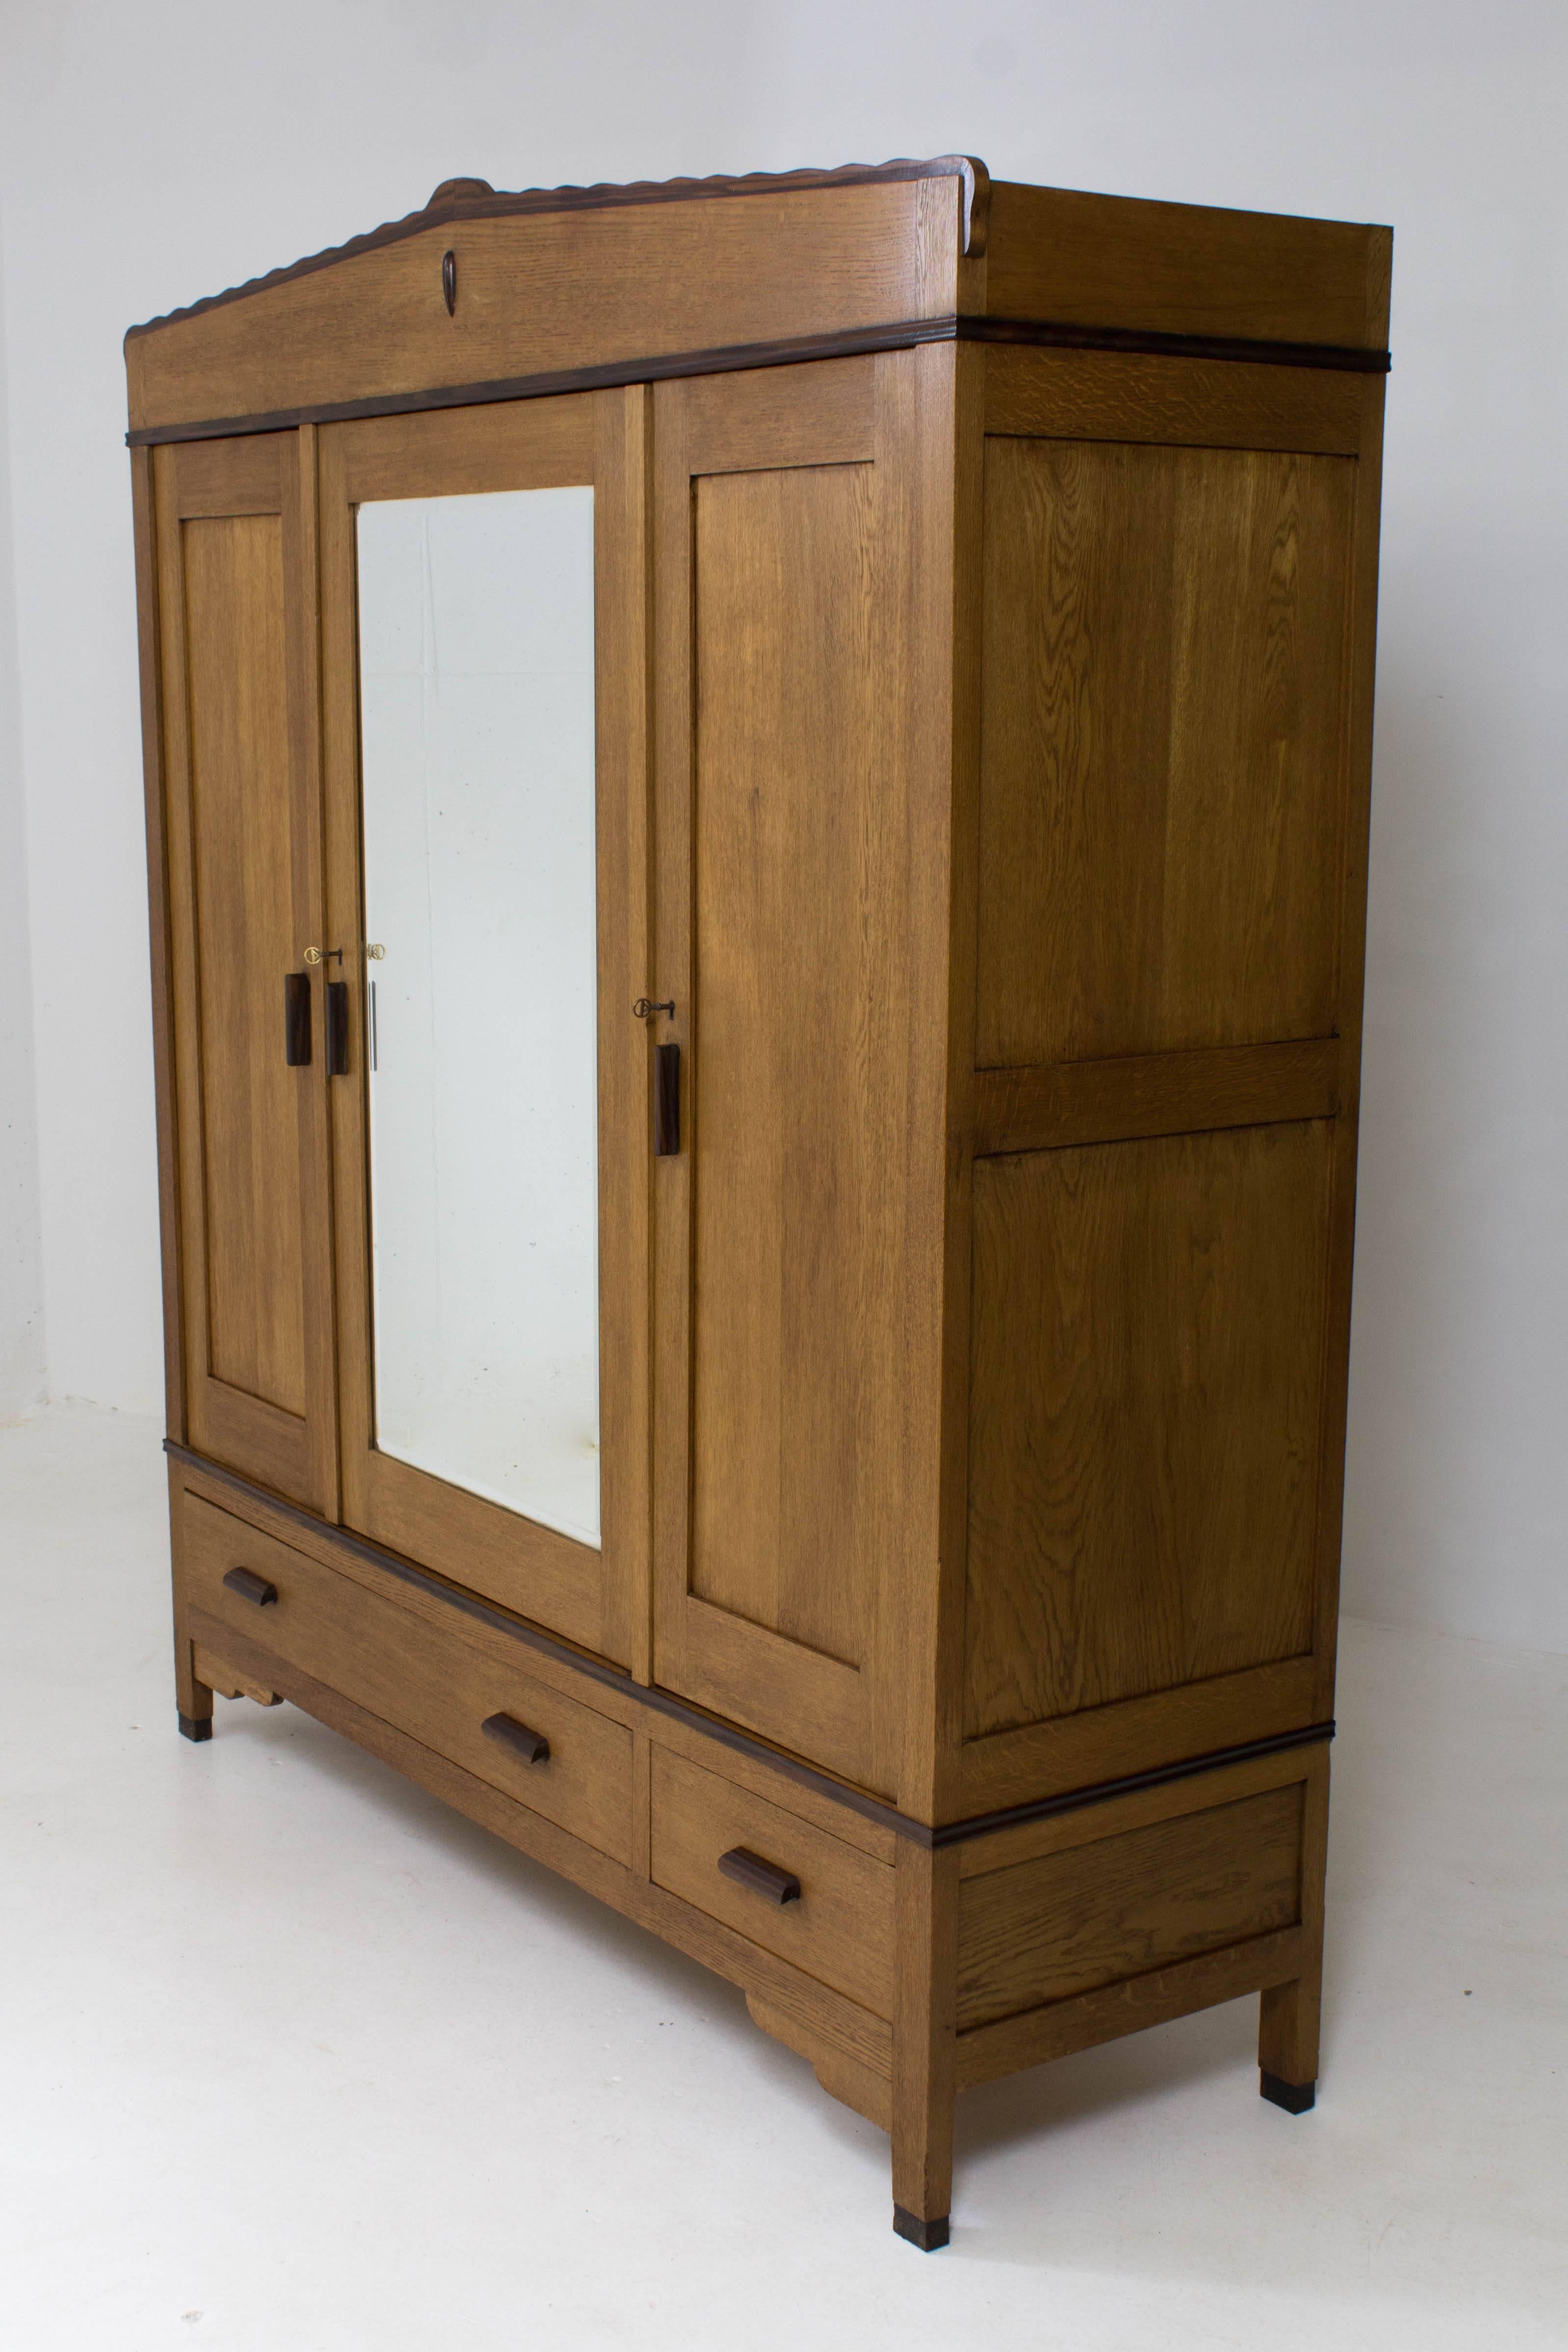 Stunning oak and ebony Macassar Art Deco Amsterdam School wardrobe by Fa.Drilling, Amsterdam, 1920s.
Marked on the two original keys.
The door in the middle has the original bevelled mirror.
This wardrobe can be dismantled for transport.
Four